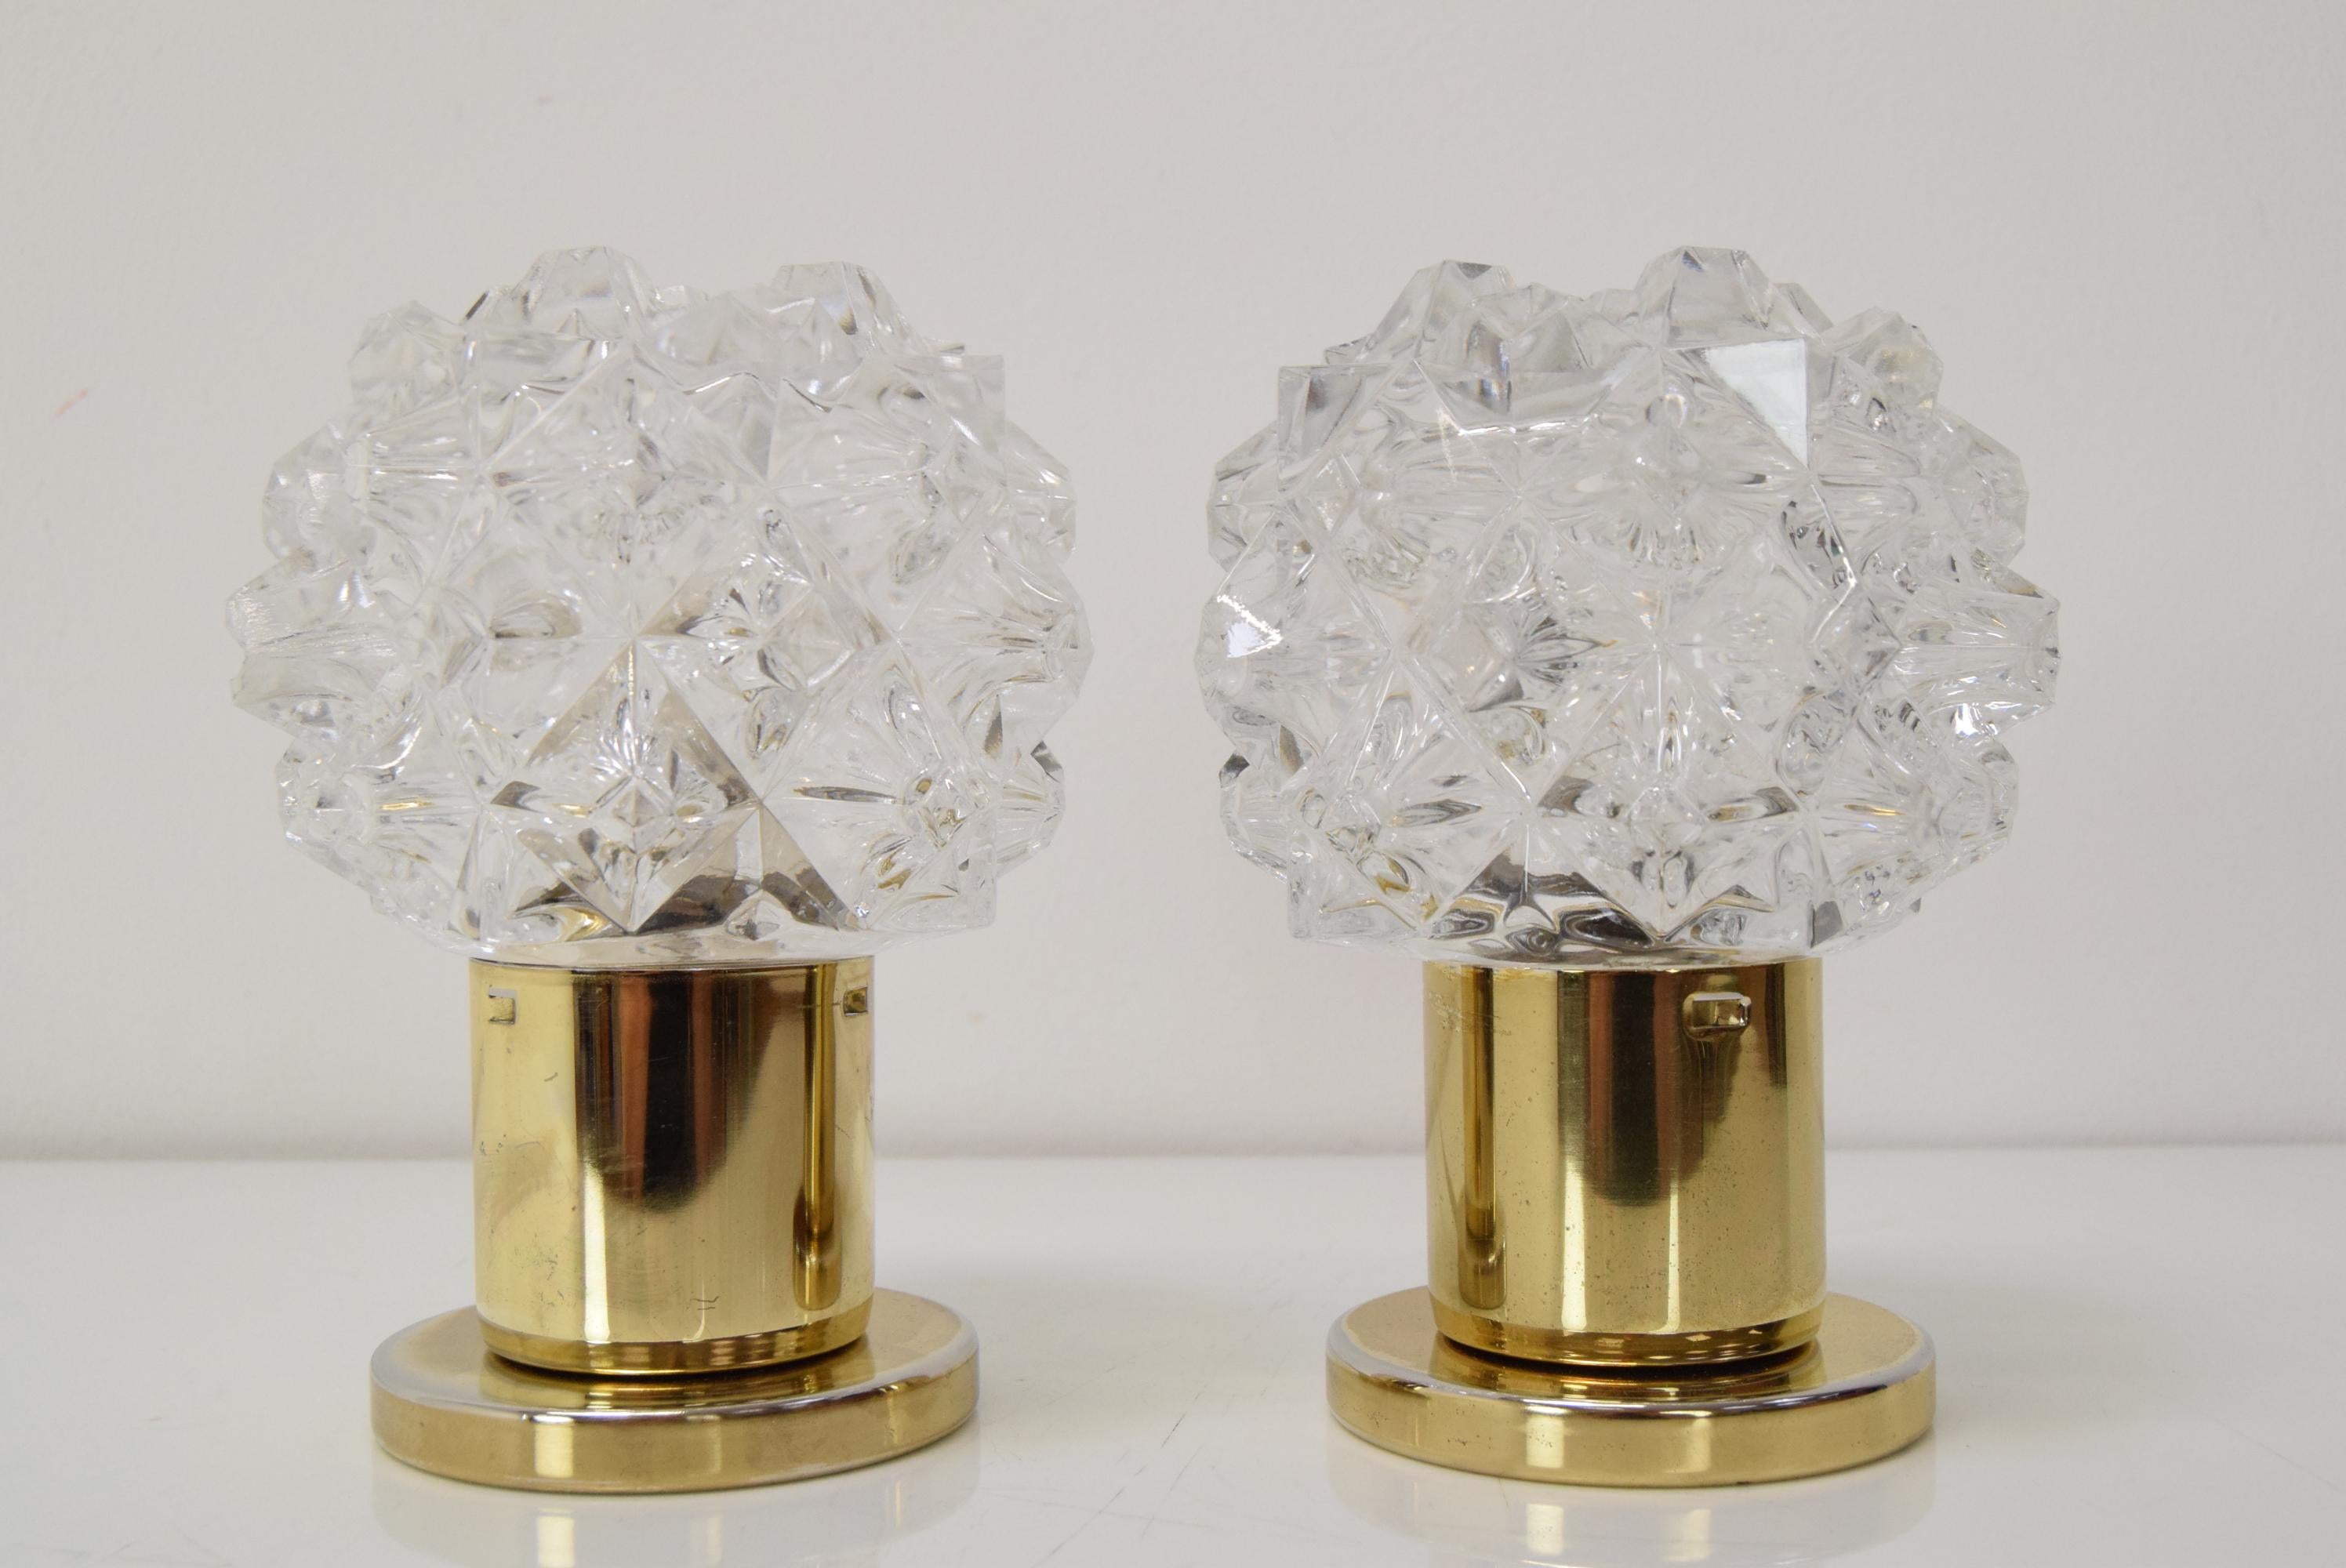 Brass Pair of Design Table or Wall Lamps by Preciosa, Kamenicky Senov, 1960's. For Sale